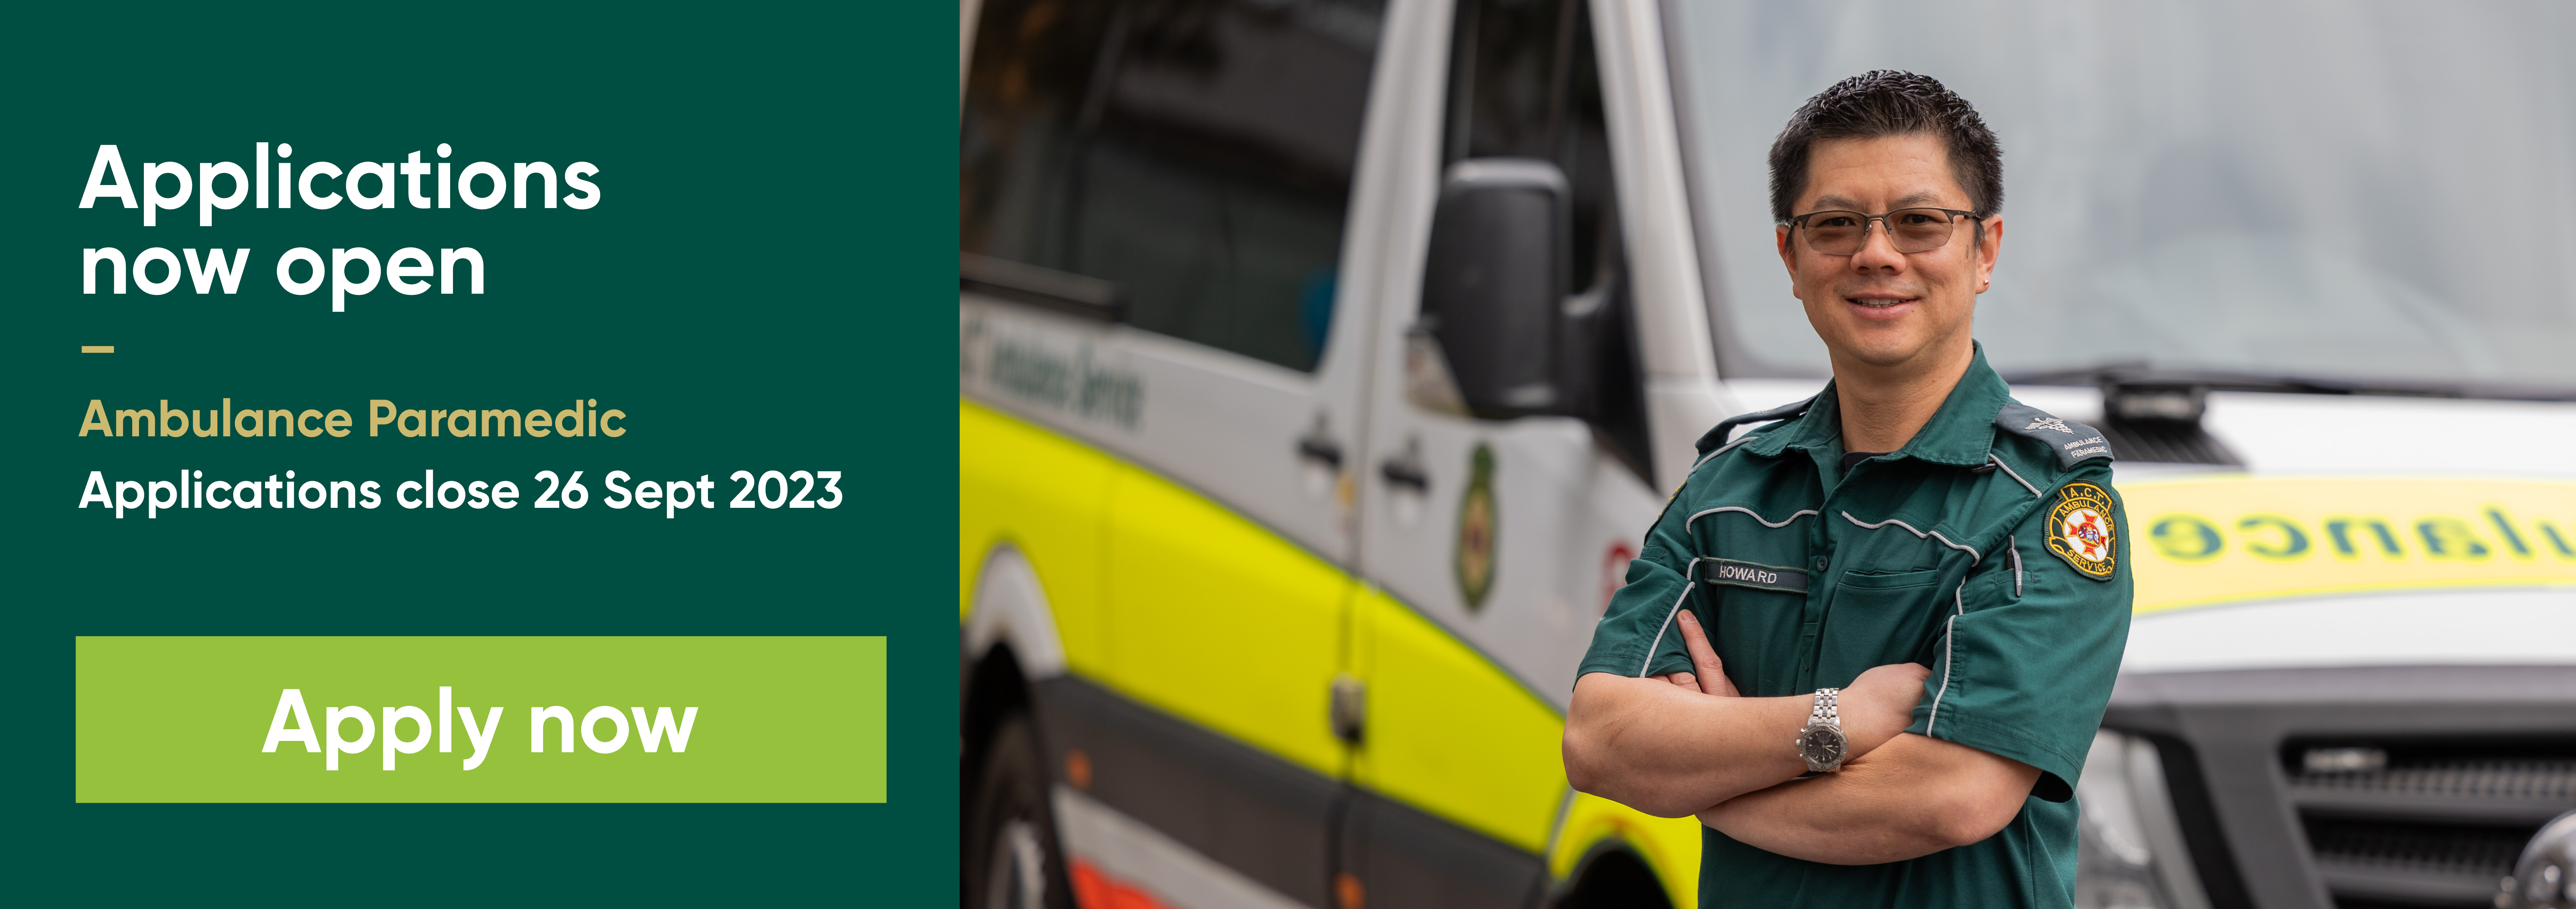 Applications now open for Ambulance paramedic. Applications close 26 September 2023. Apply now.